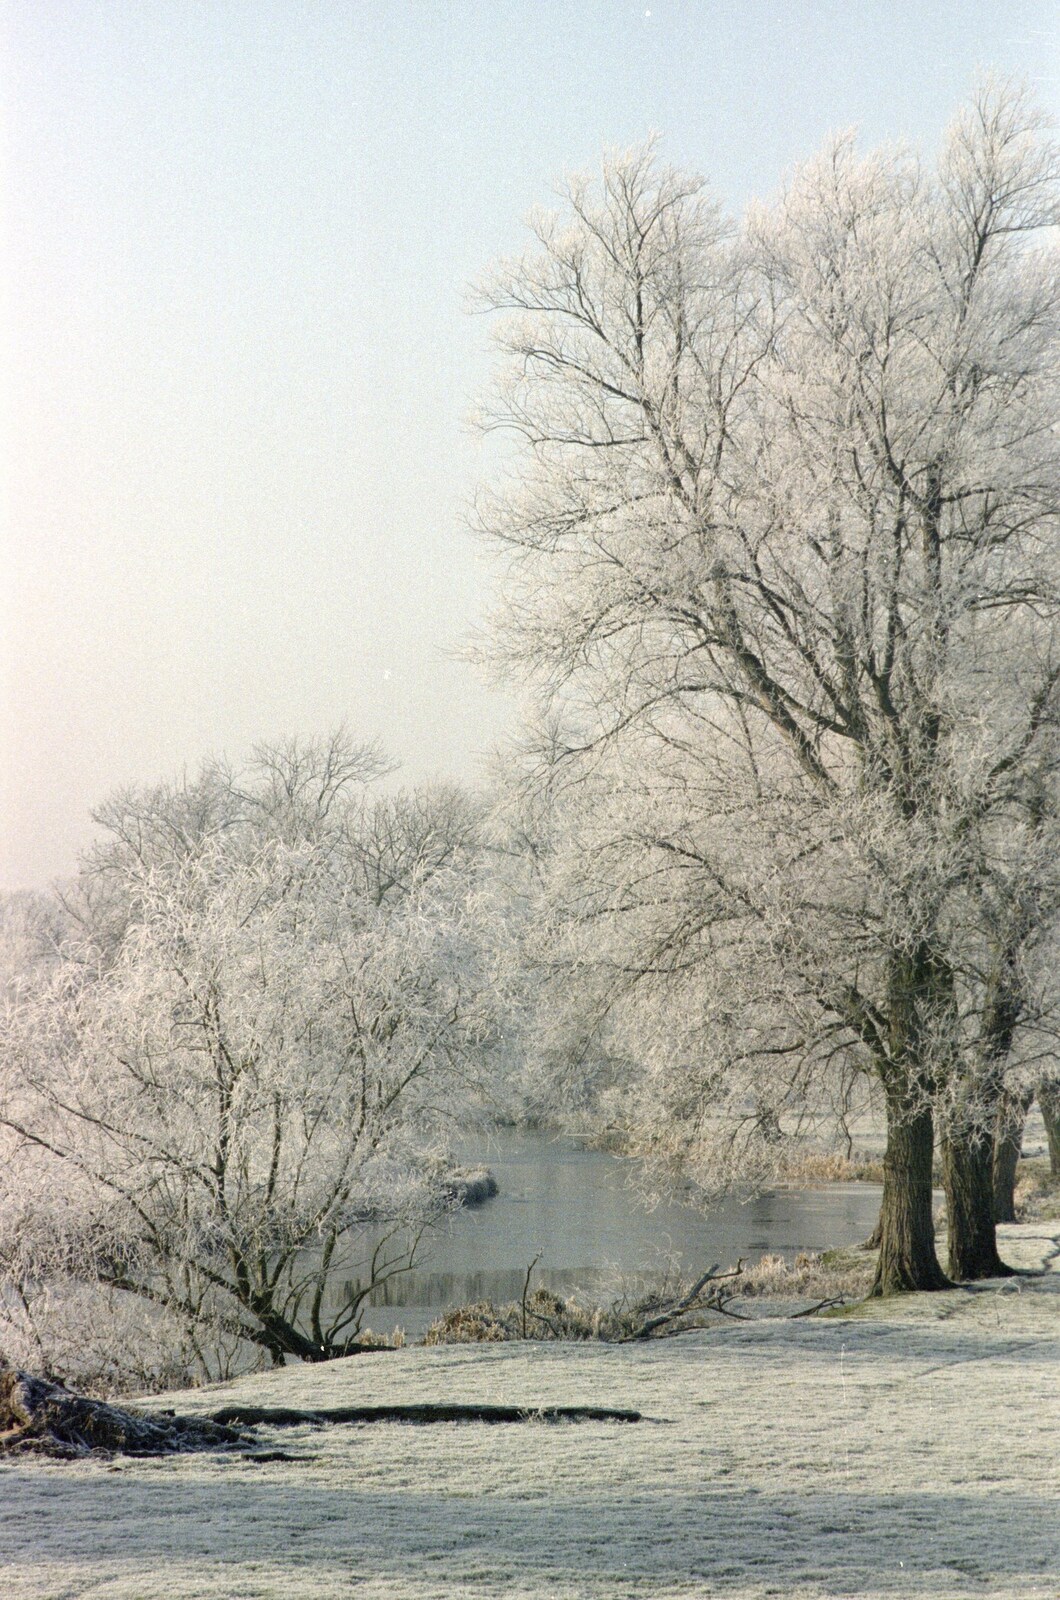 Down by the Waveney, near Needham from A Frosty Morning, Suffolk and Norfolk - 15th December 1991